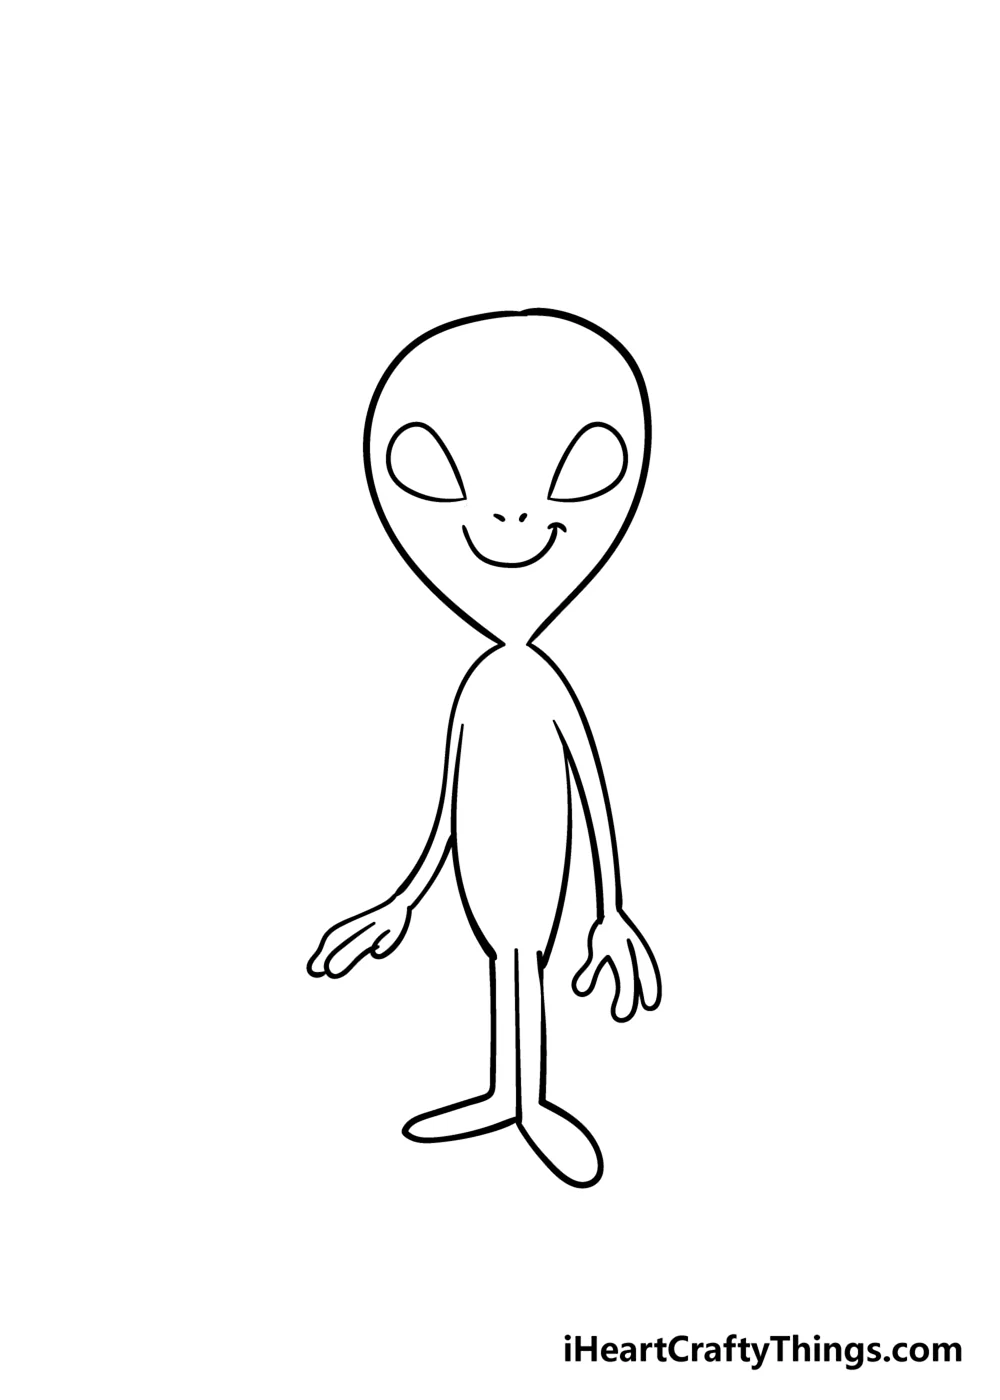 How to draw Alien